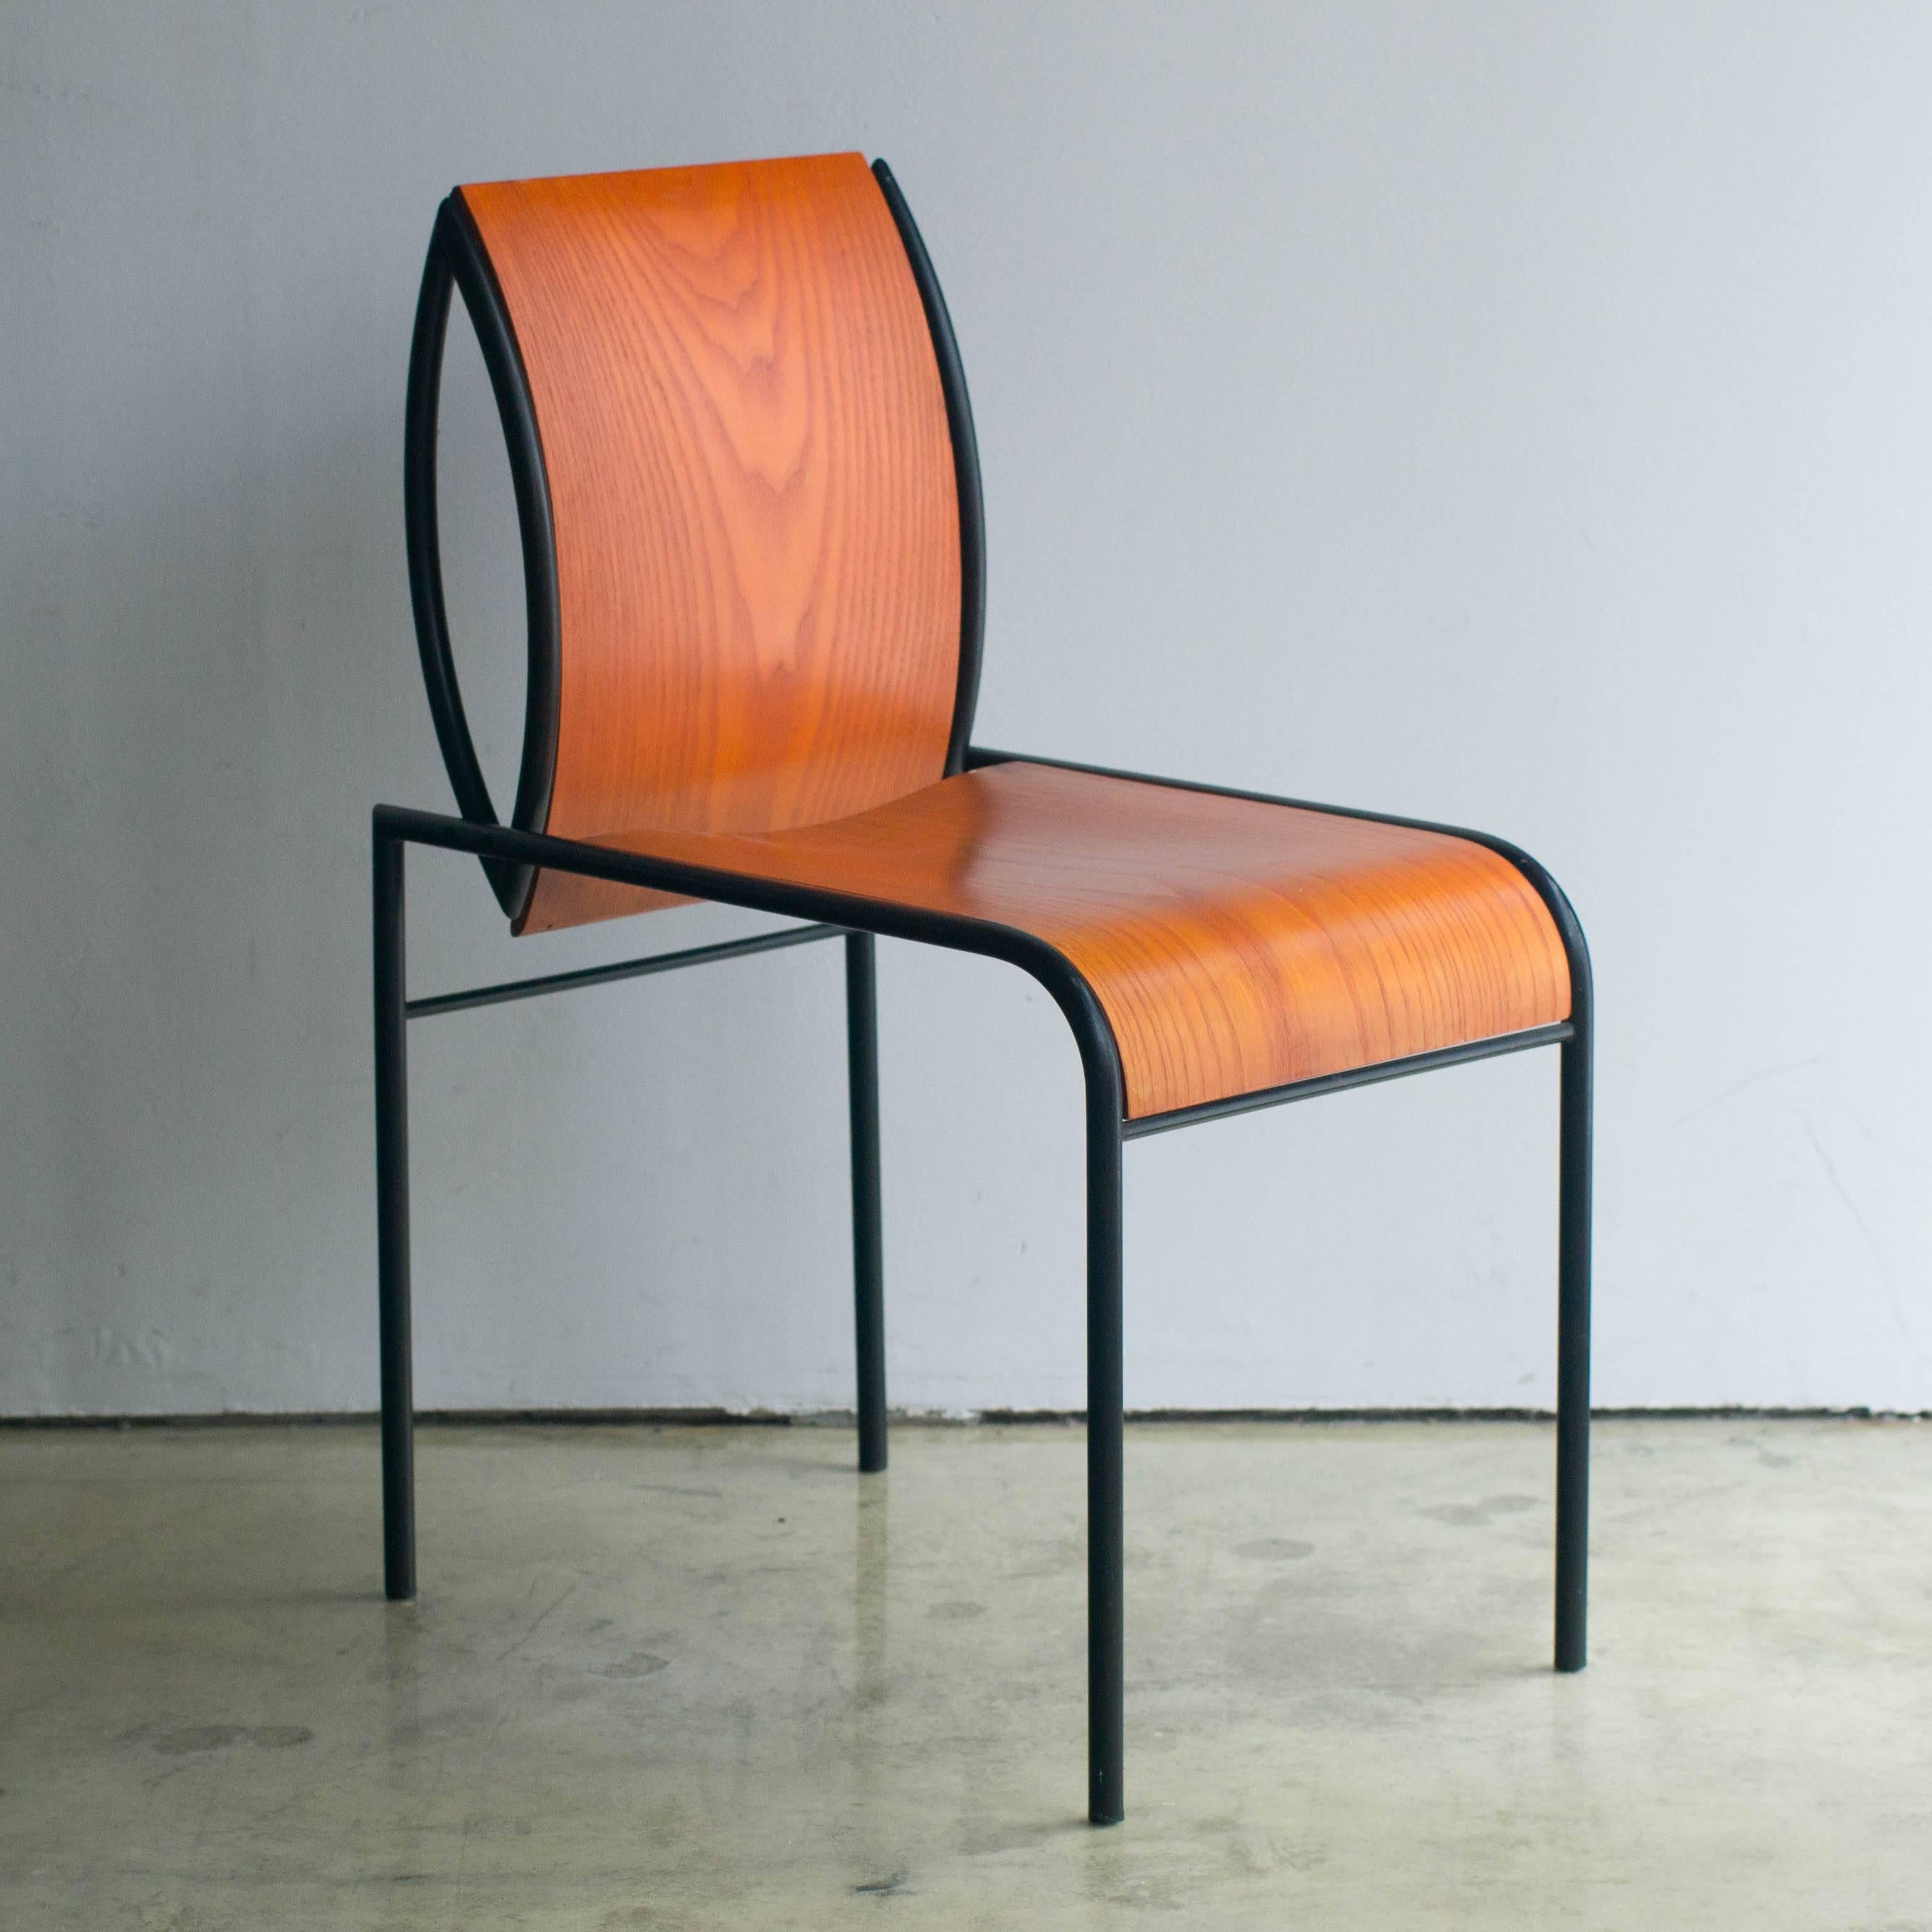 Late 20th Century Kim Steel and Plywood Chair Michele De Lucchi for Memphis Original 1980s For Sale